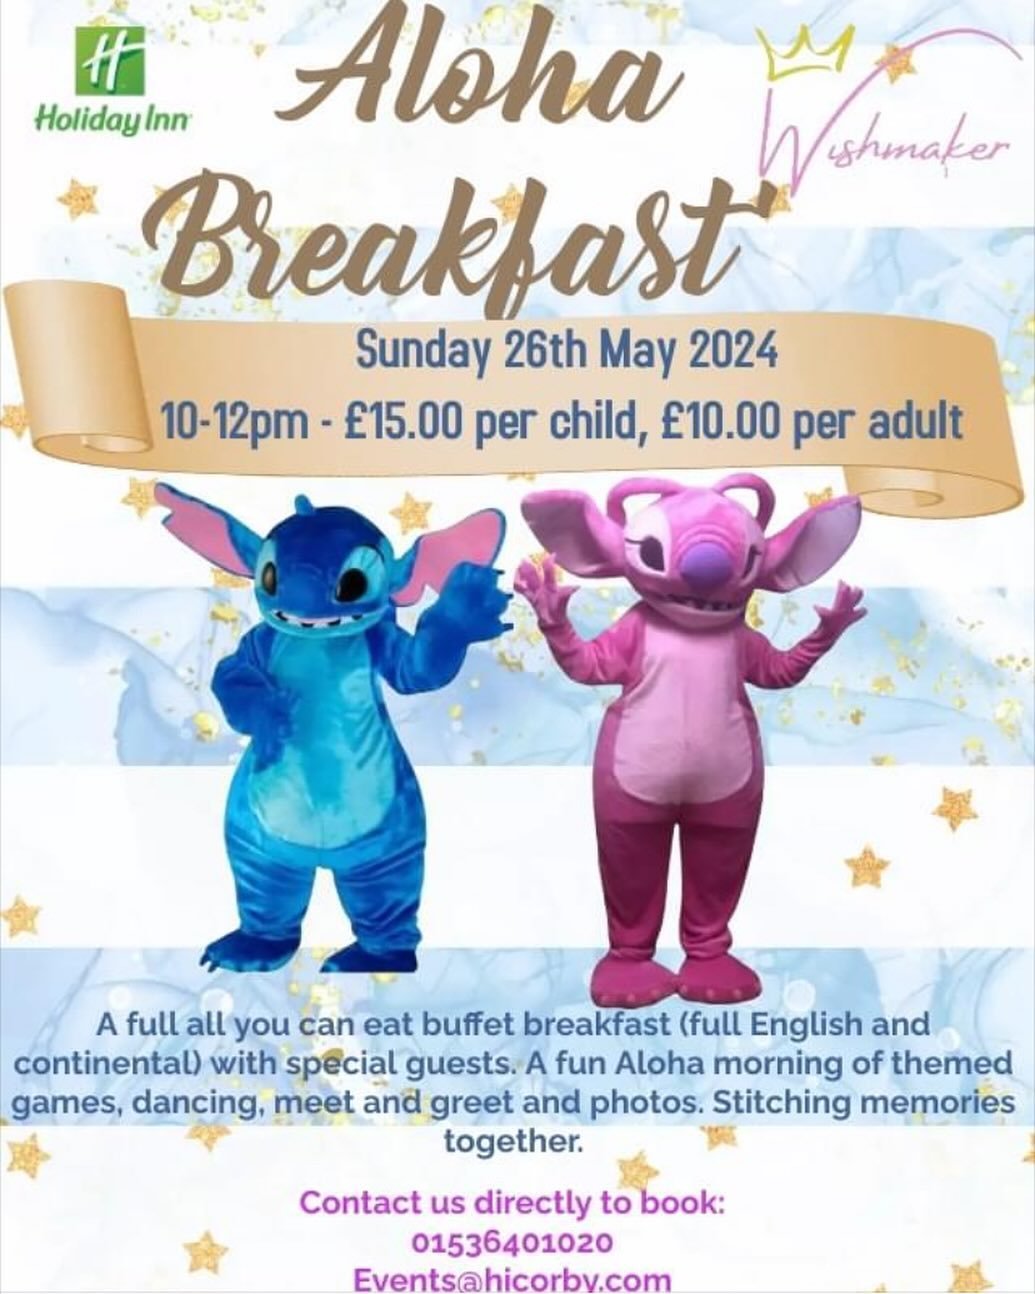 Last chance to book! Contact @holidayinncorby for our Aloha breakfast with your favourite blue and pink friends!! 

#corby #northamptonshire #northamptonshiremums #ketteringmums #corbymums #wellingborough #marketharborough